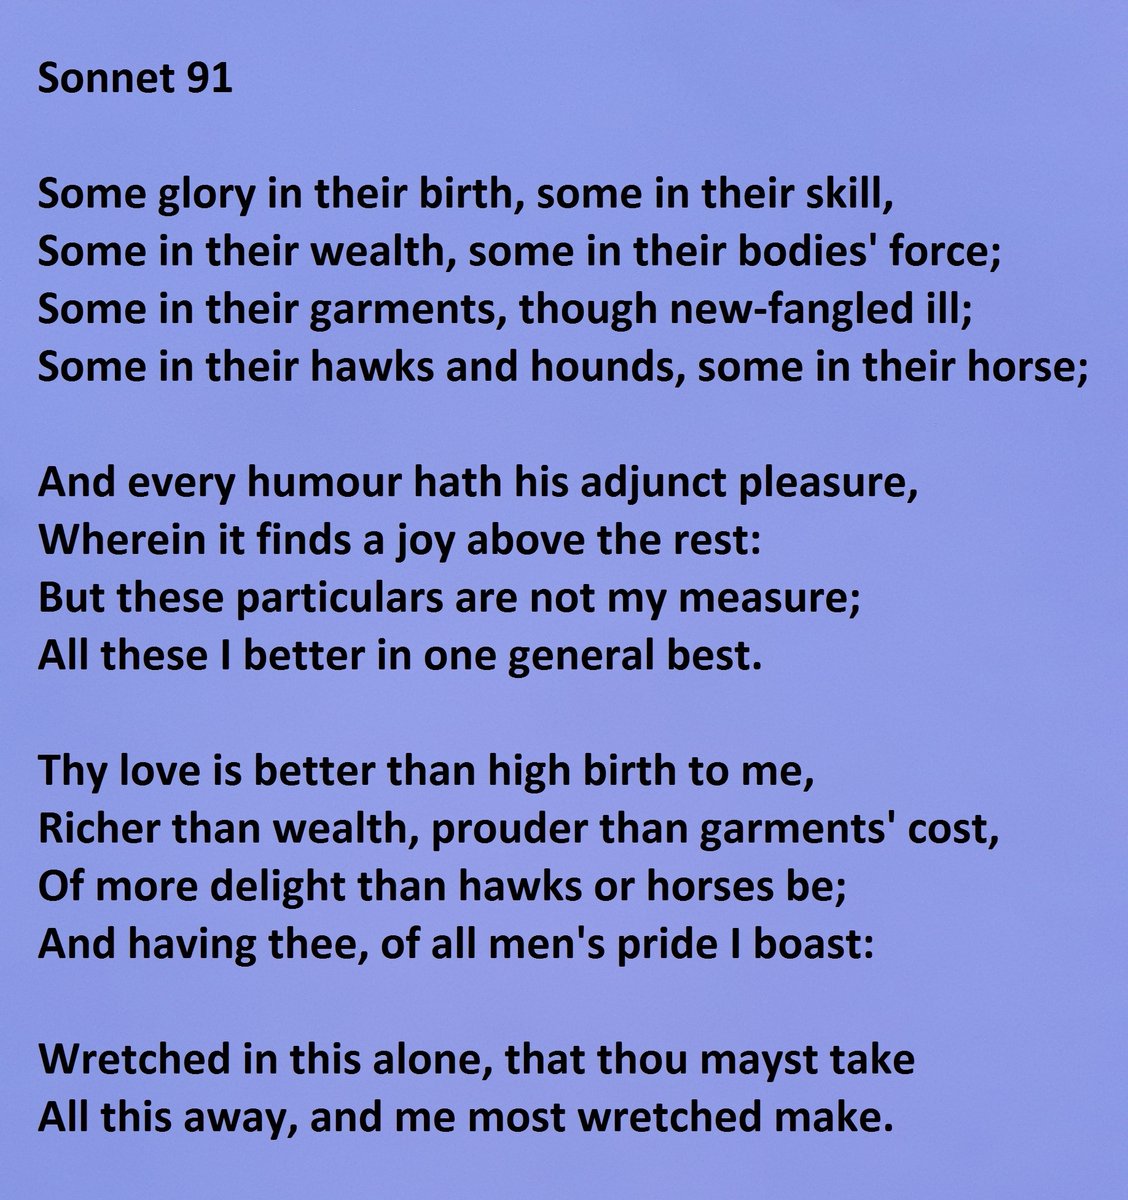 Sonnet 91 by William Shakespeare - "Some glory in their birth, some in their skill"